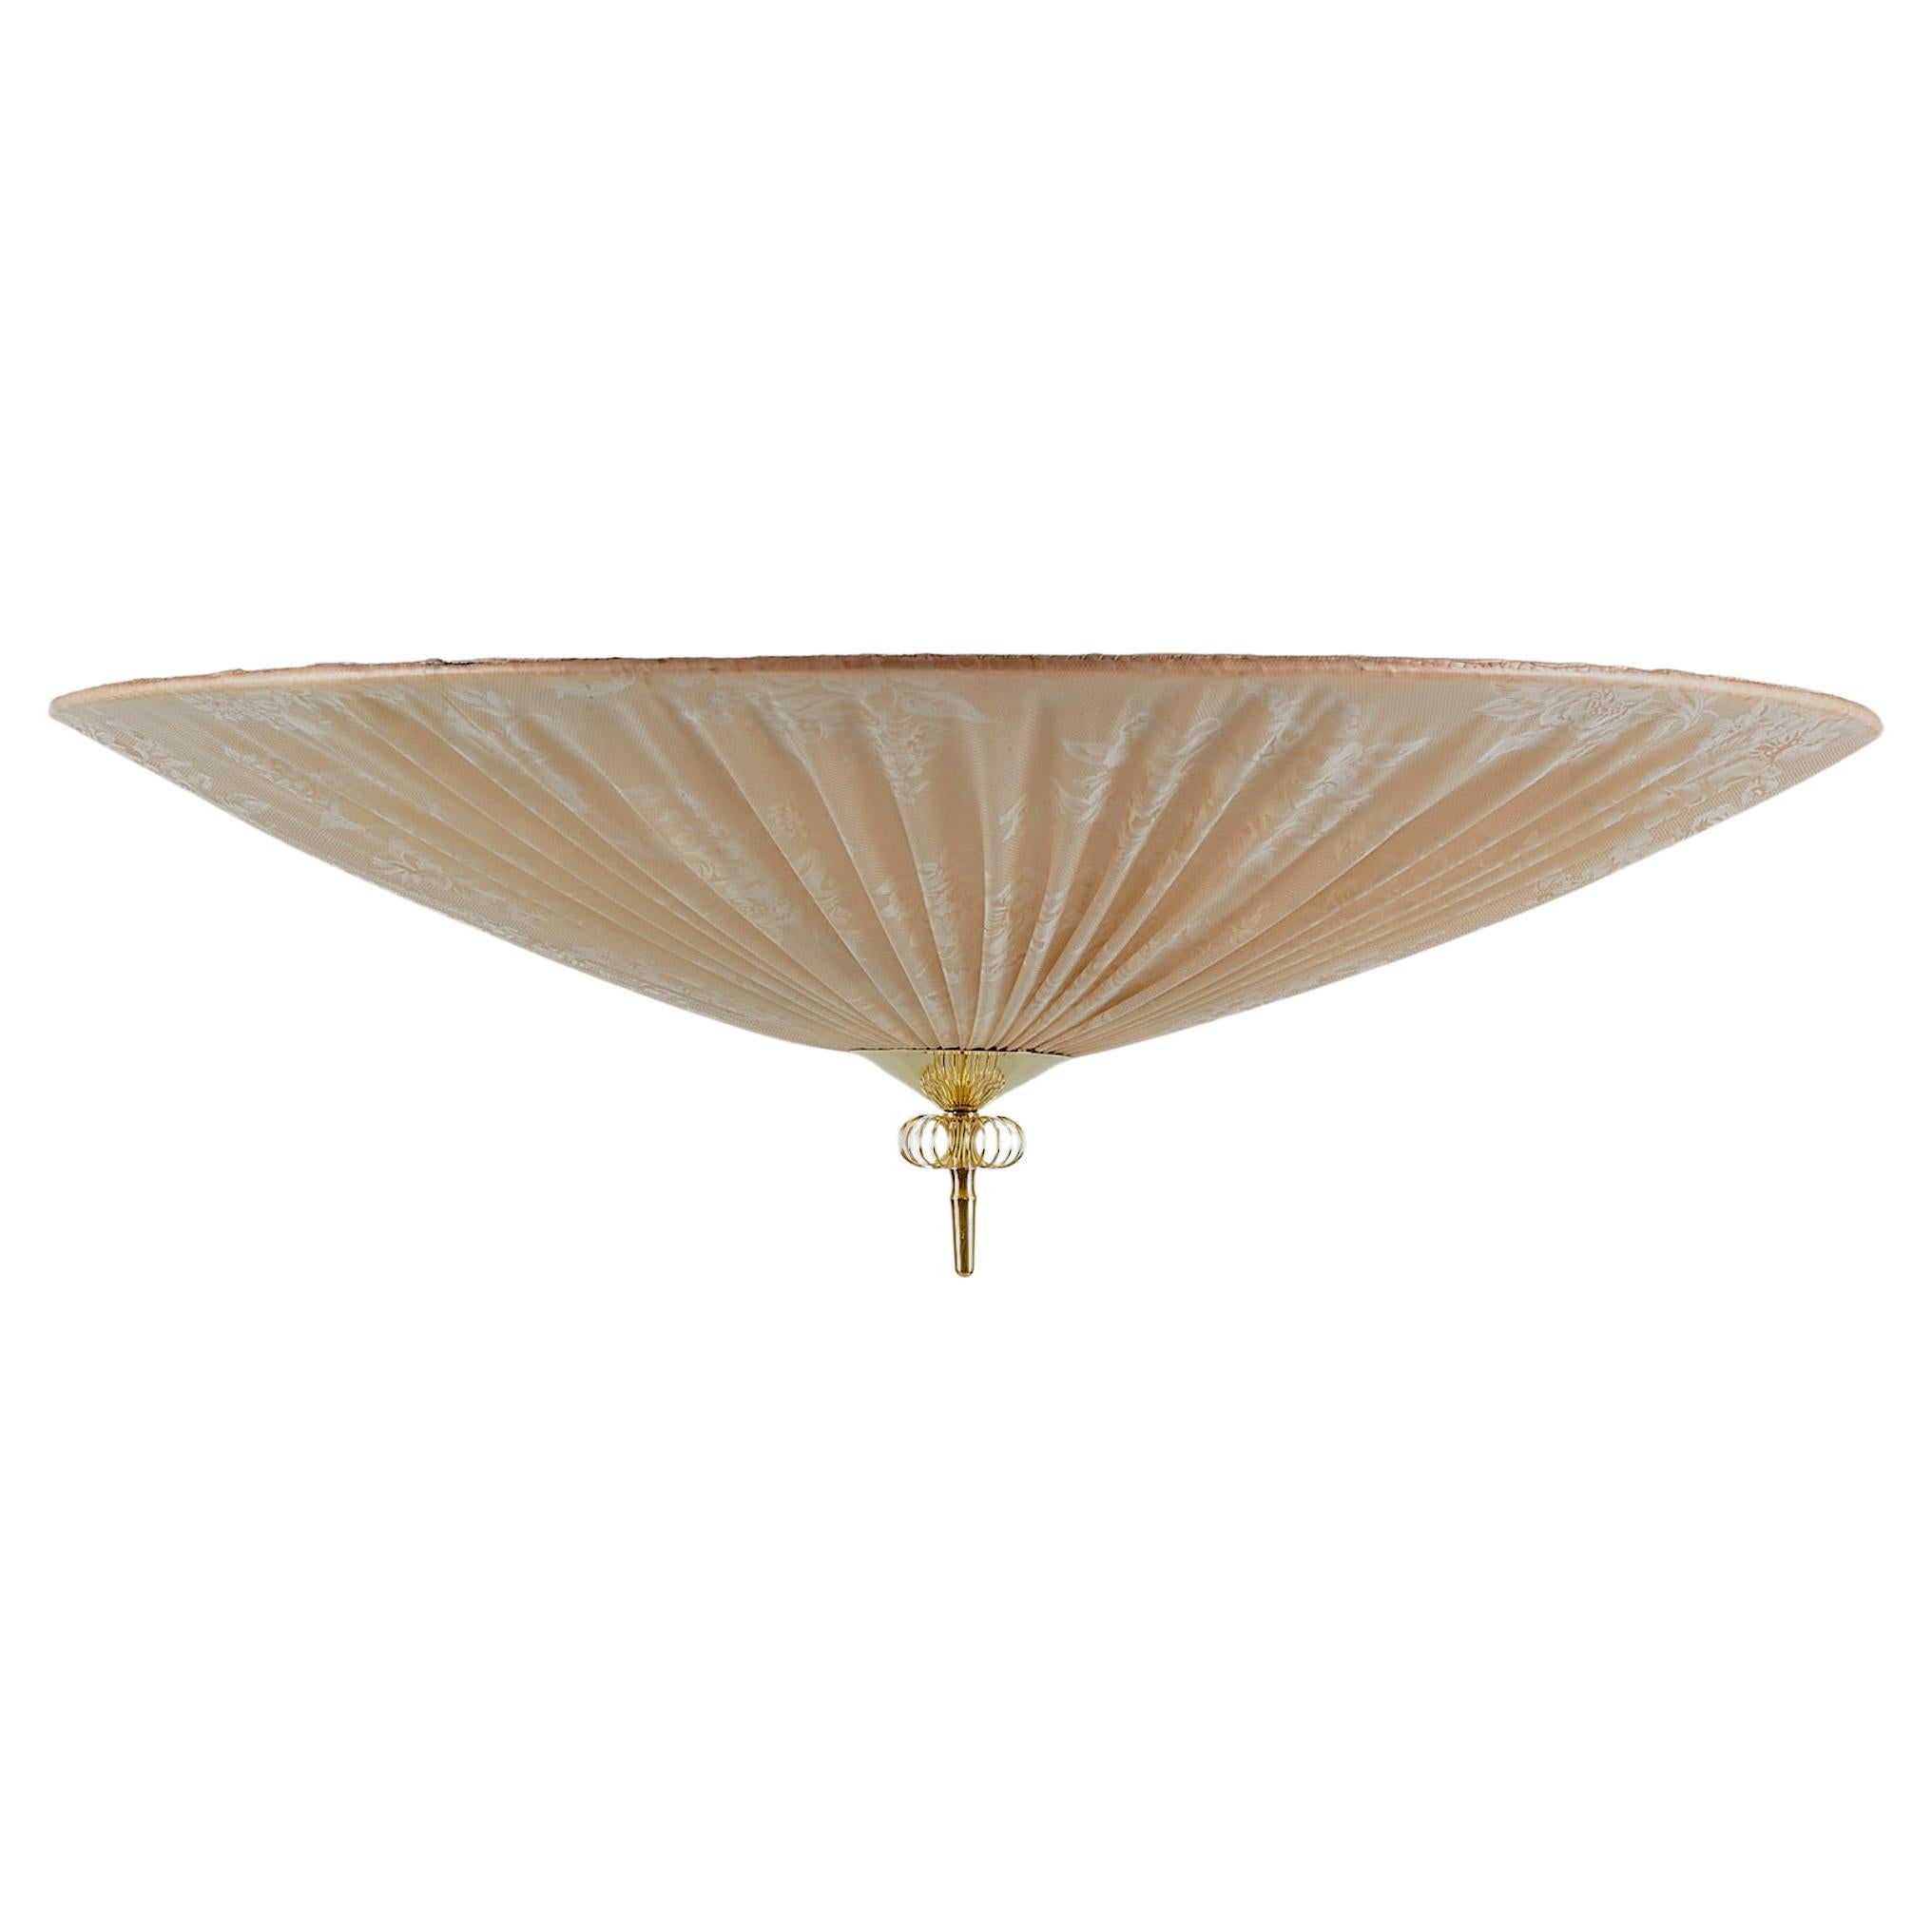 Large ceiling light by Paavo Tynell, Model 1076, Idman. For Sale